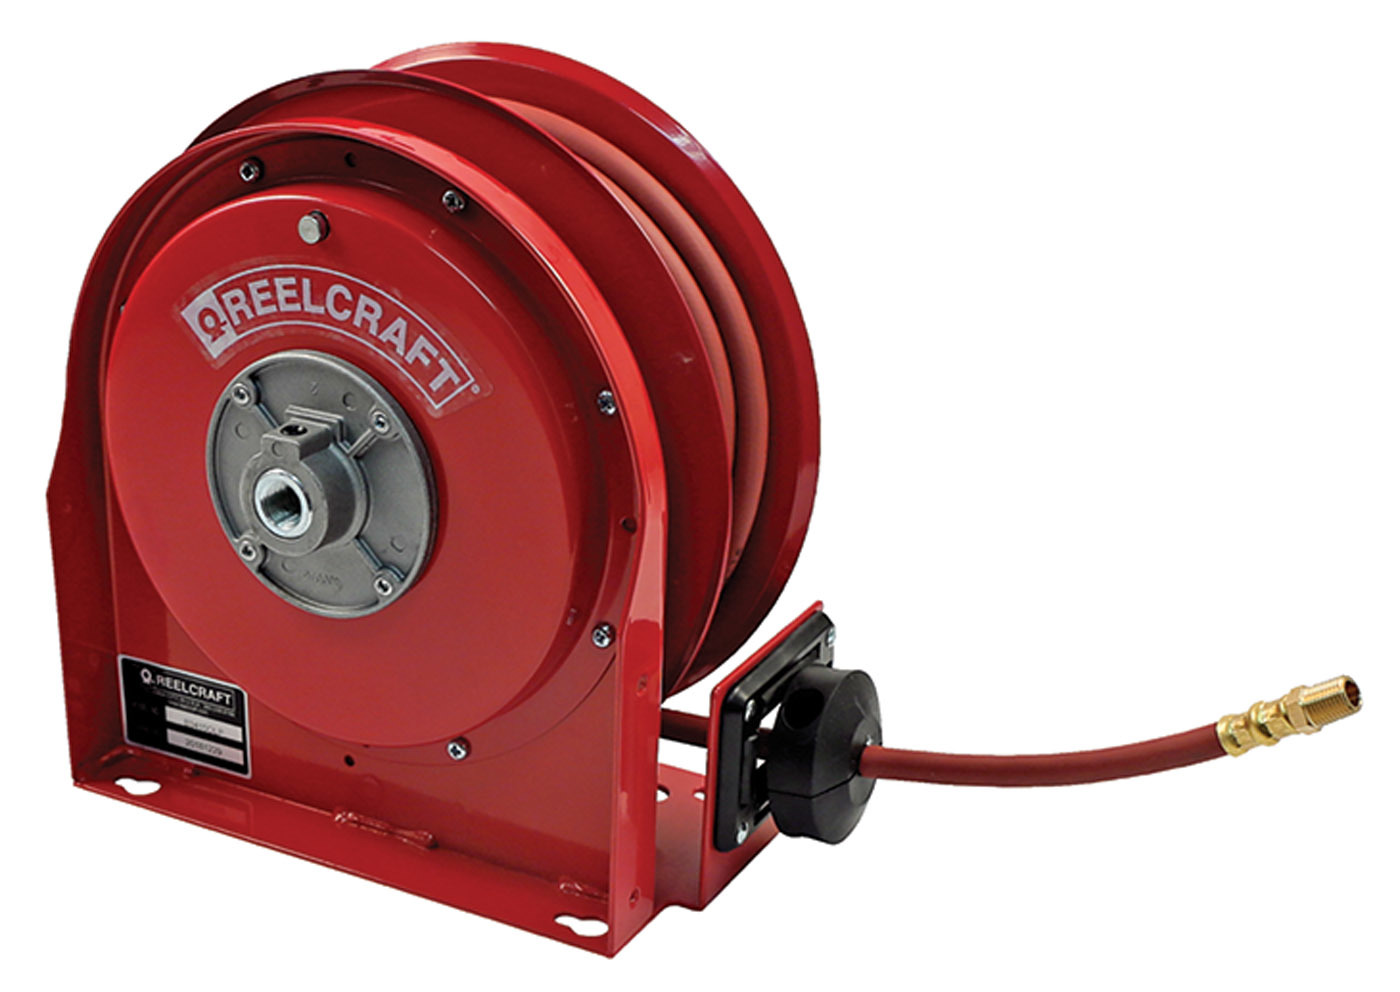 Cox Reels Aluminum hose reel with spring rewind holds 1/2 inch X 25 Feet  300 PSI air hose not included